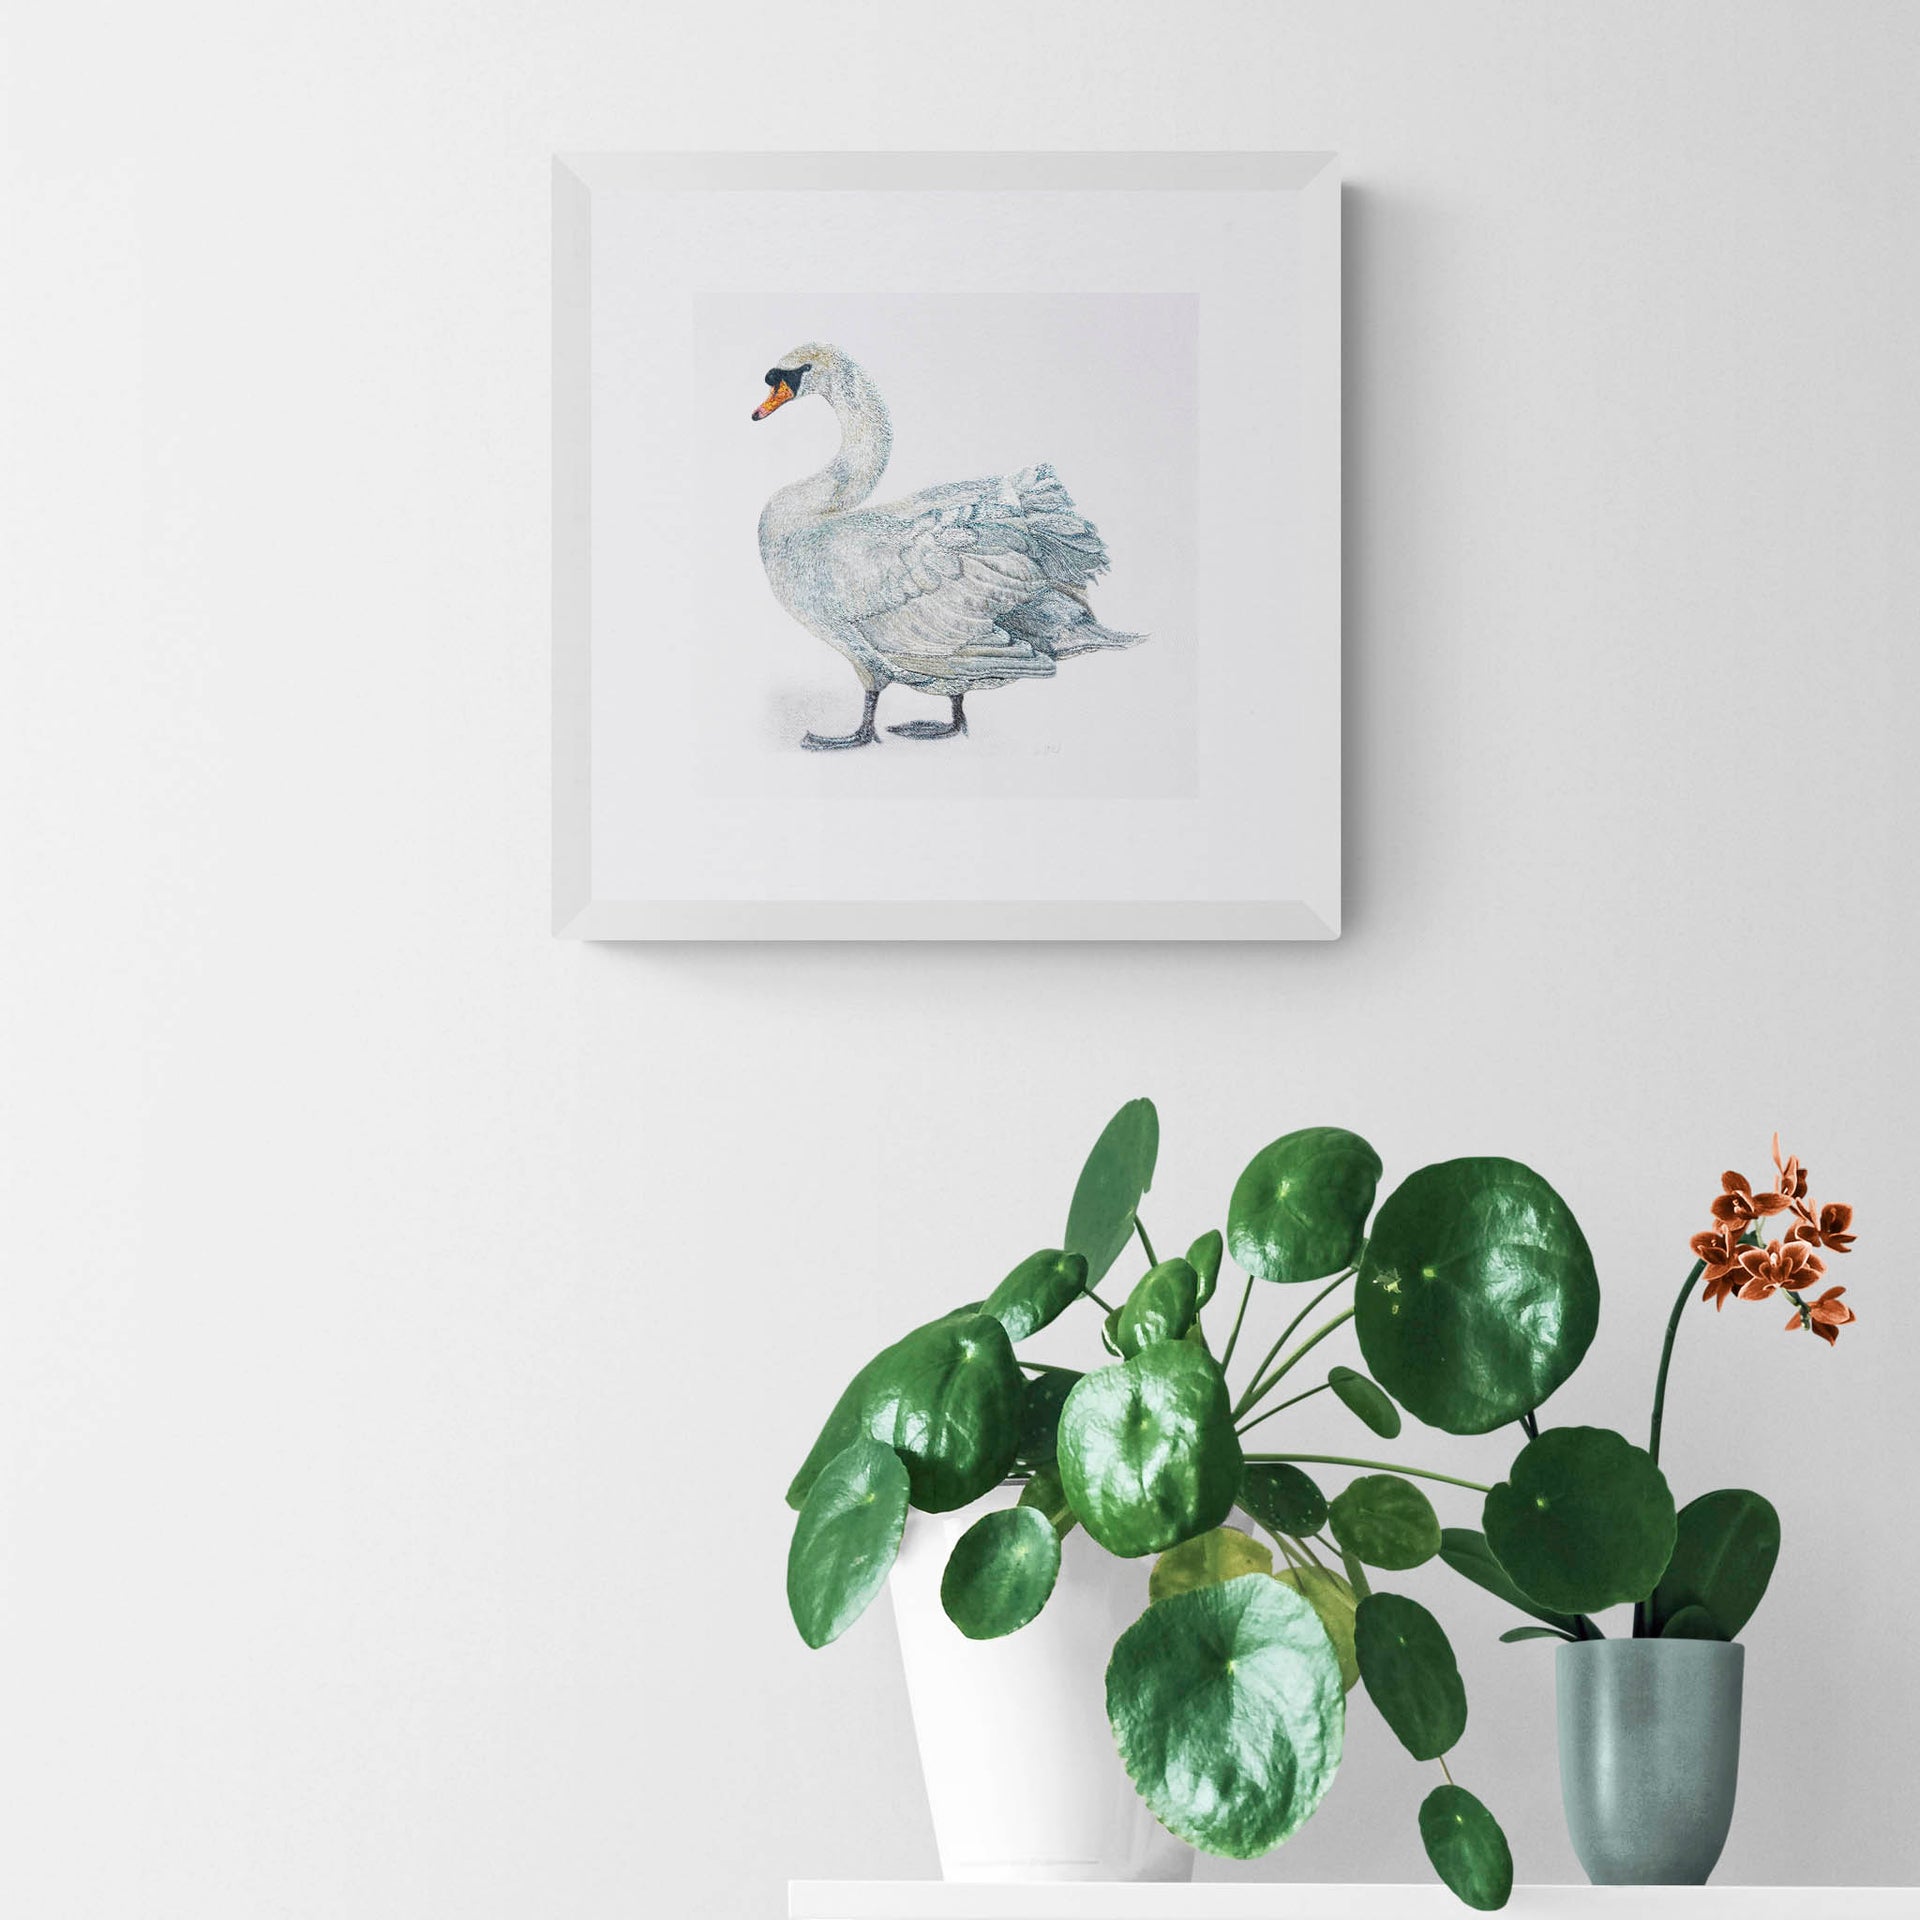 Swan hand embroidered limited edition print in frame on the wall